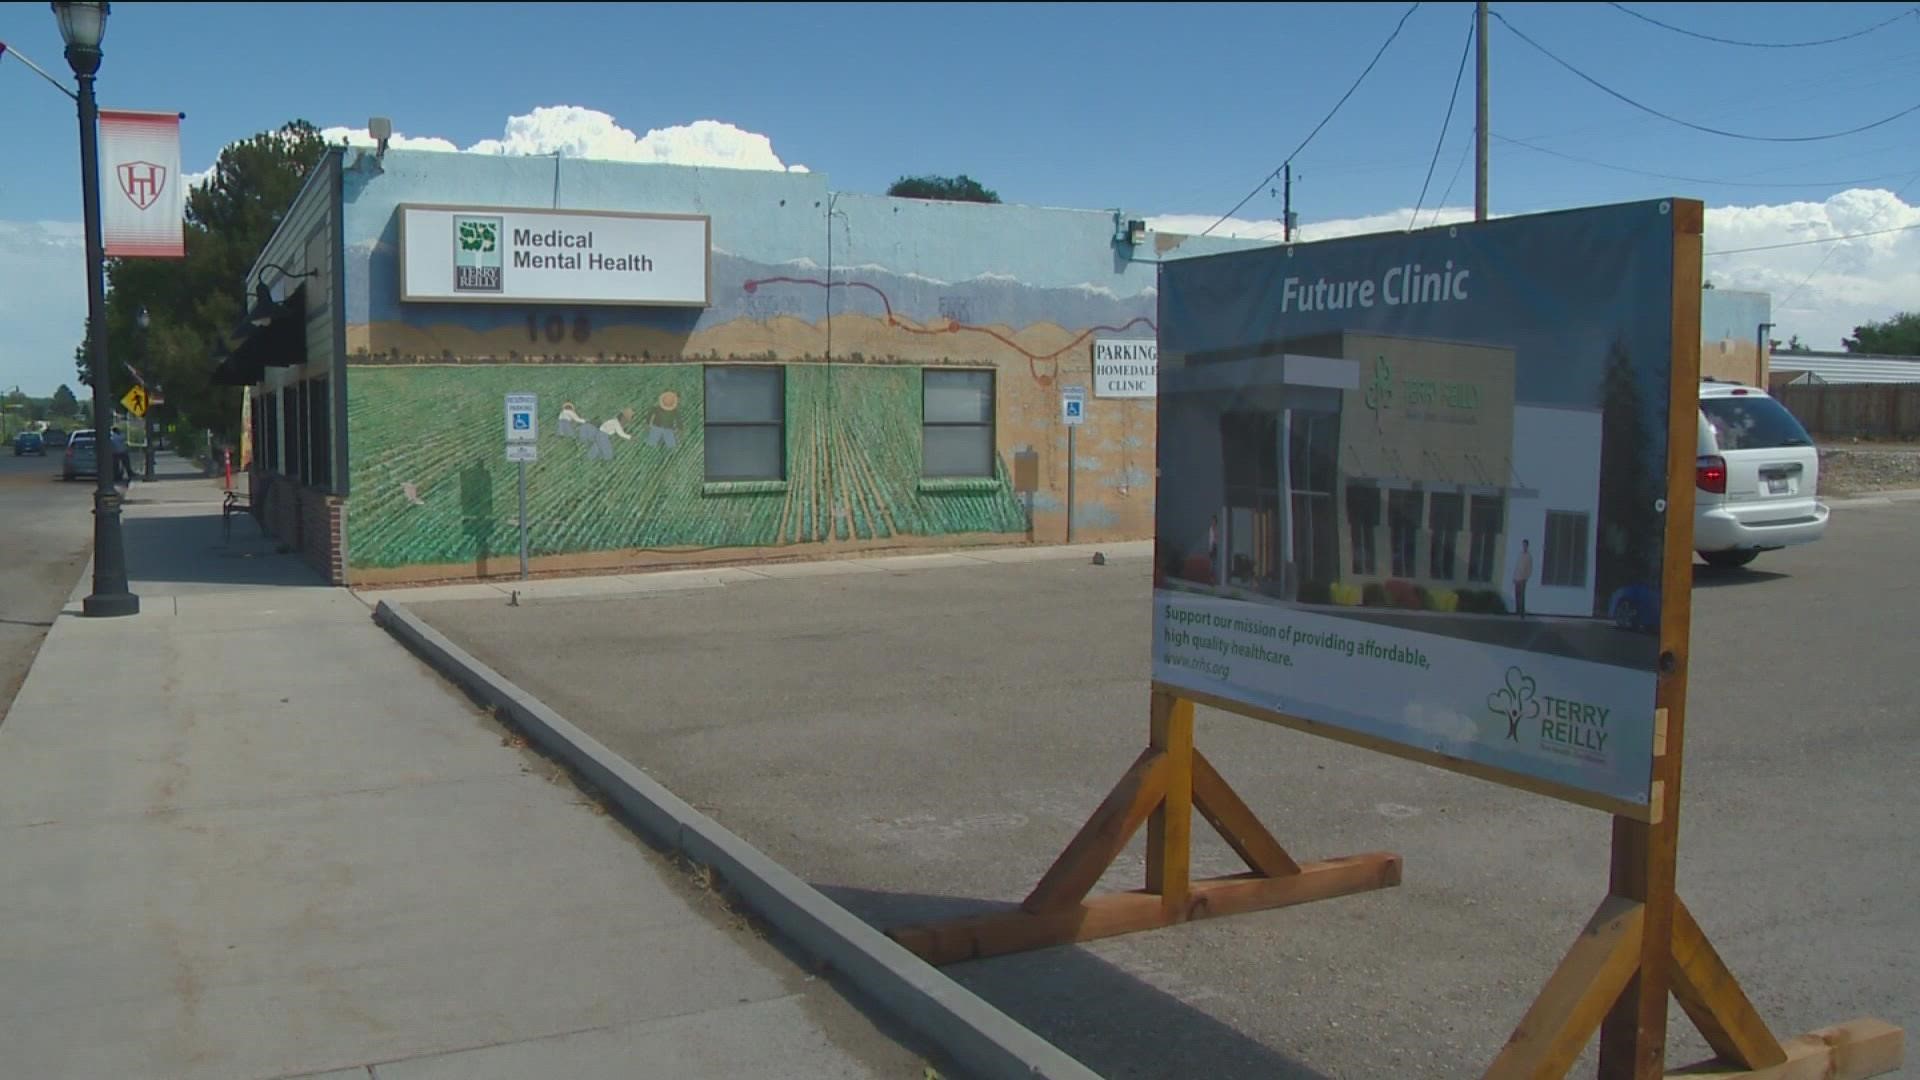 Terry Reilly Health Services is using its $1 million to build a new clinic in Homedale. Currently, their services are split between two different buildings.